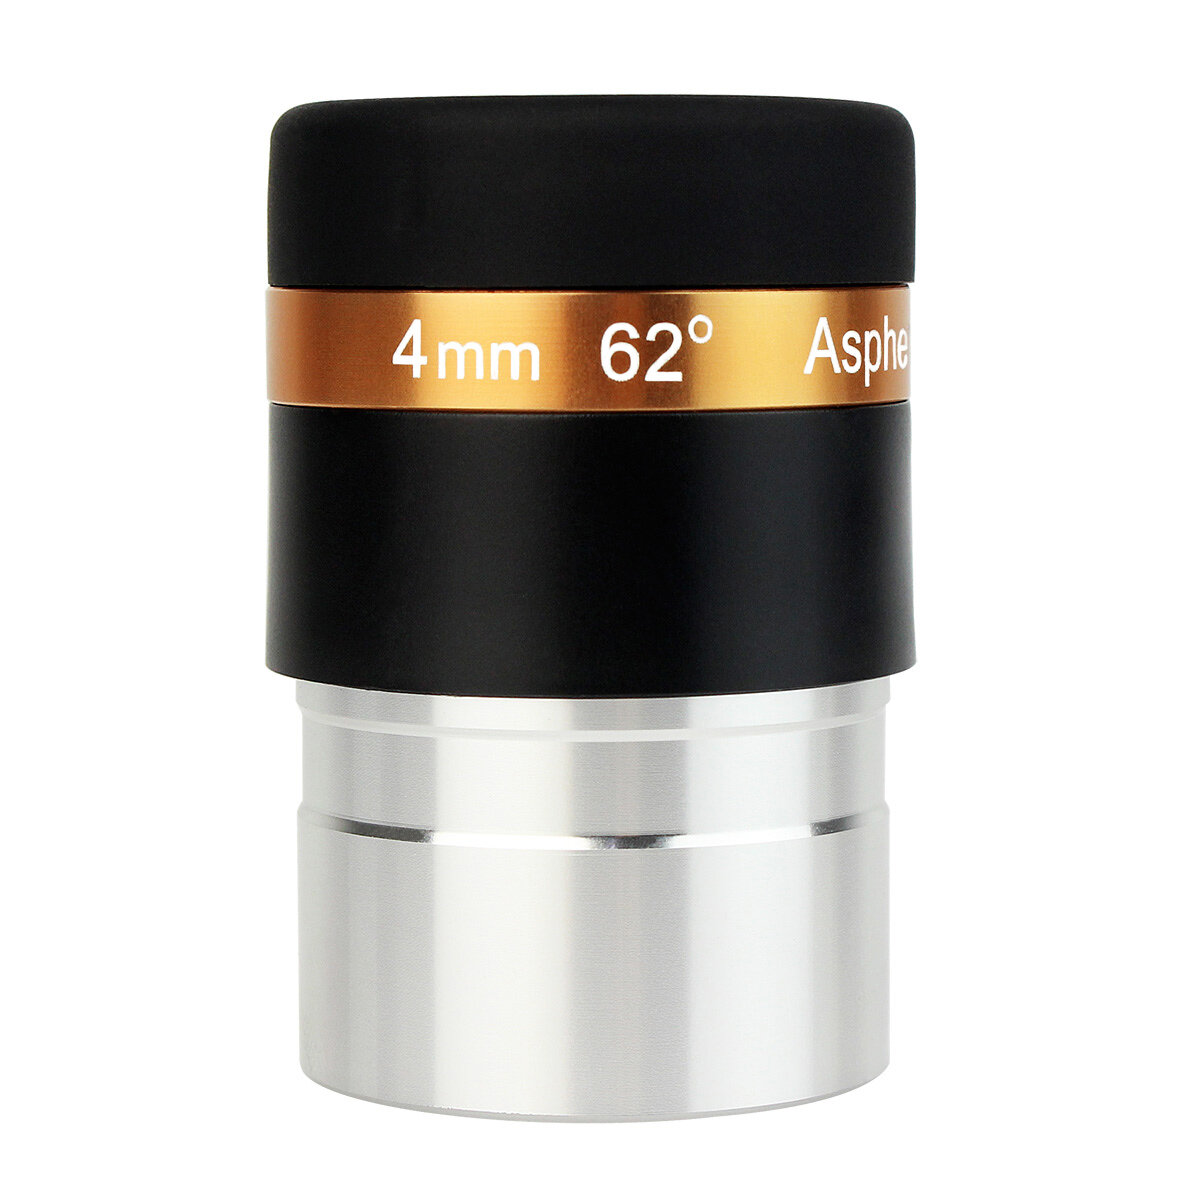 

SVBONY Lens 4mm Wide Angle 62°Aspheric Eyepiece HD Fully Coated for 1.25" 31.7mm Astronomic Telescopes -Black